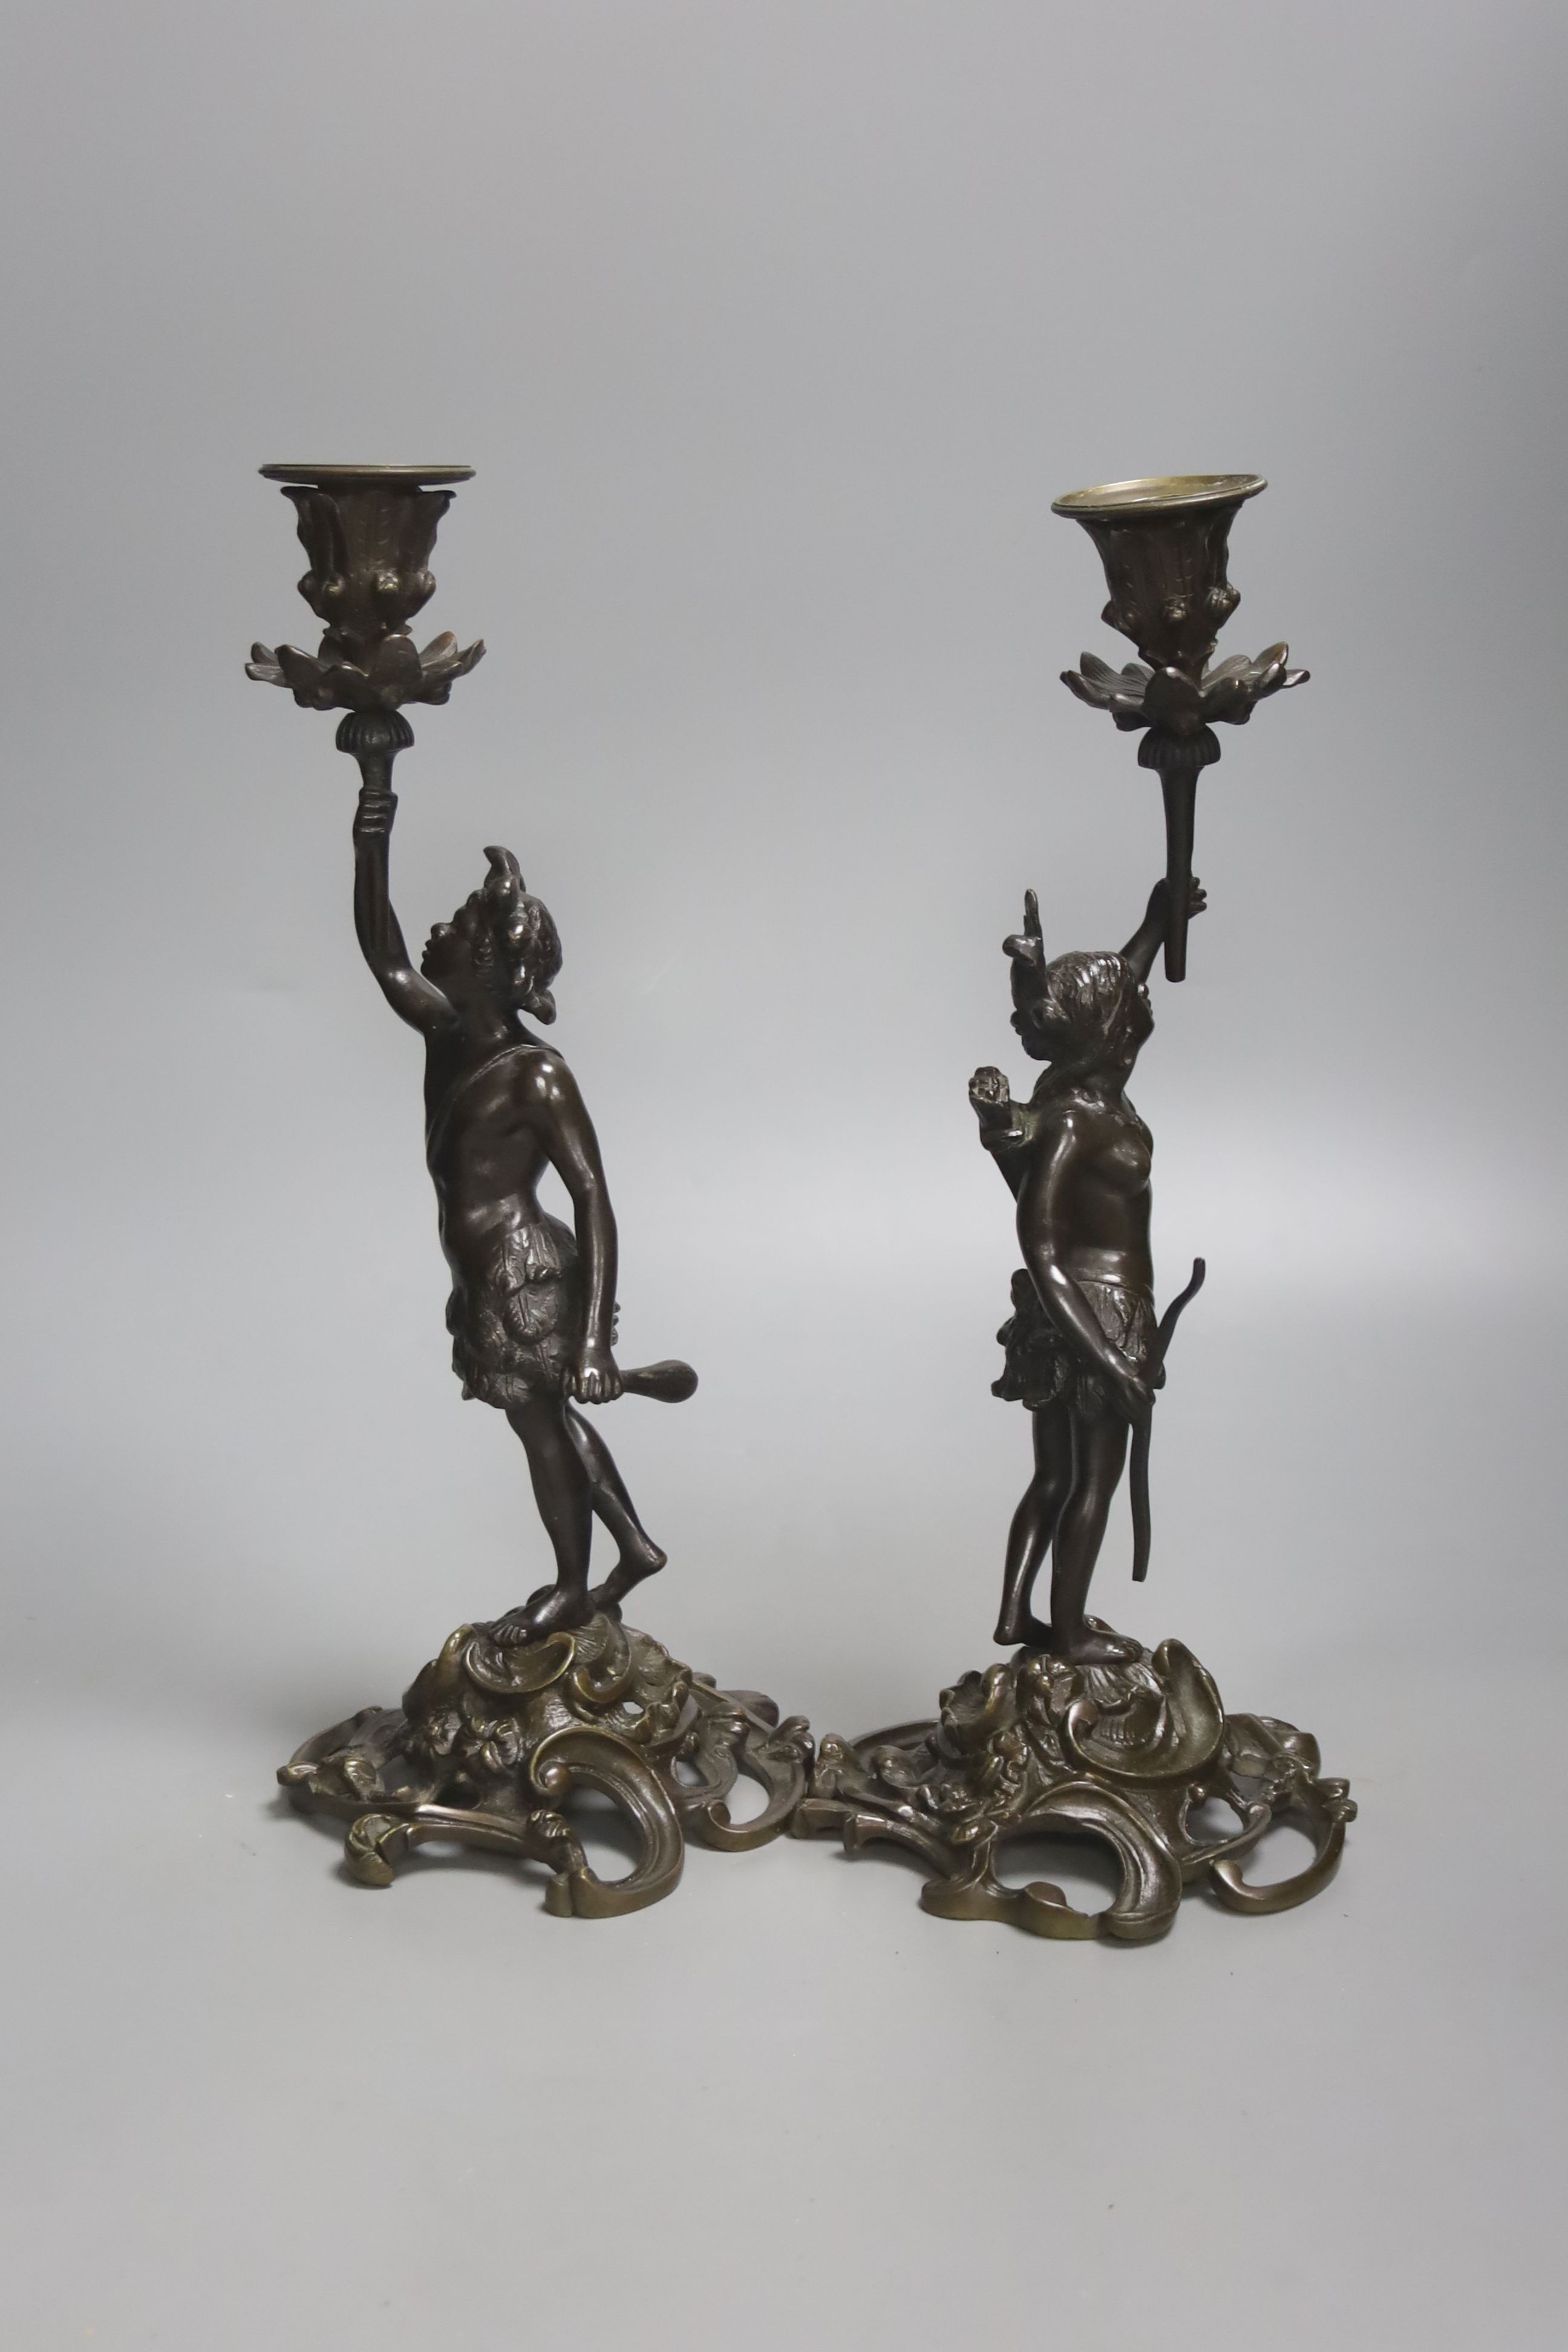 A pair of 19th century French bronze candlesticks, modelled as natives, height 32cm - Image 2 of 3